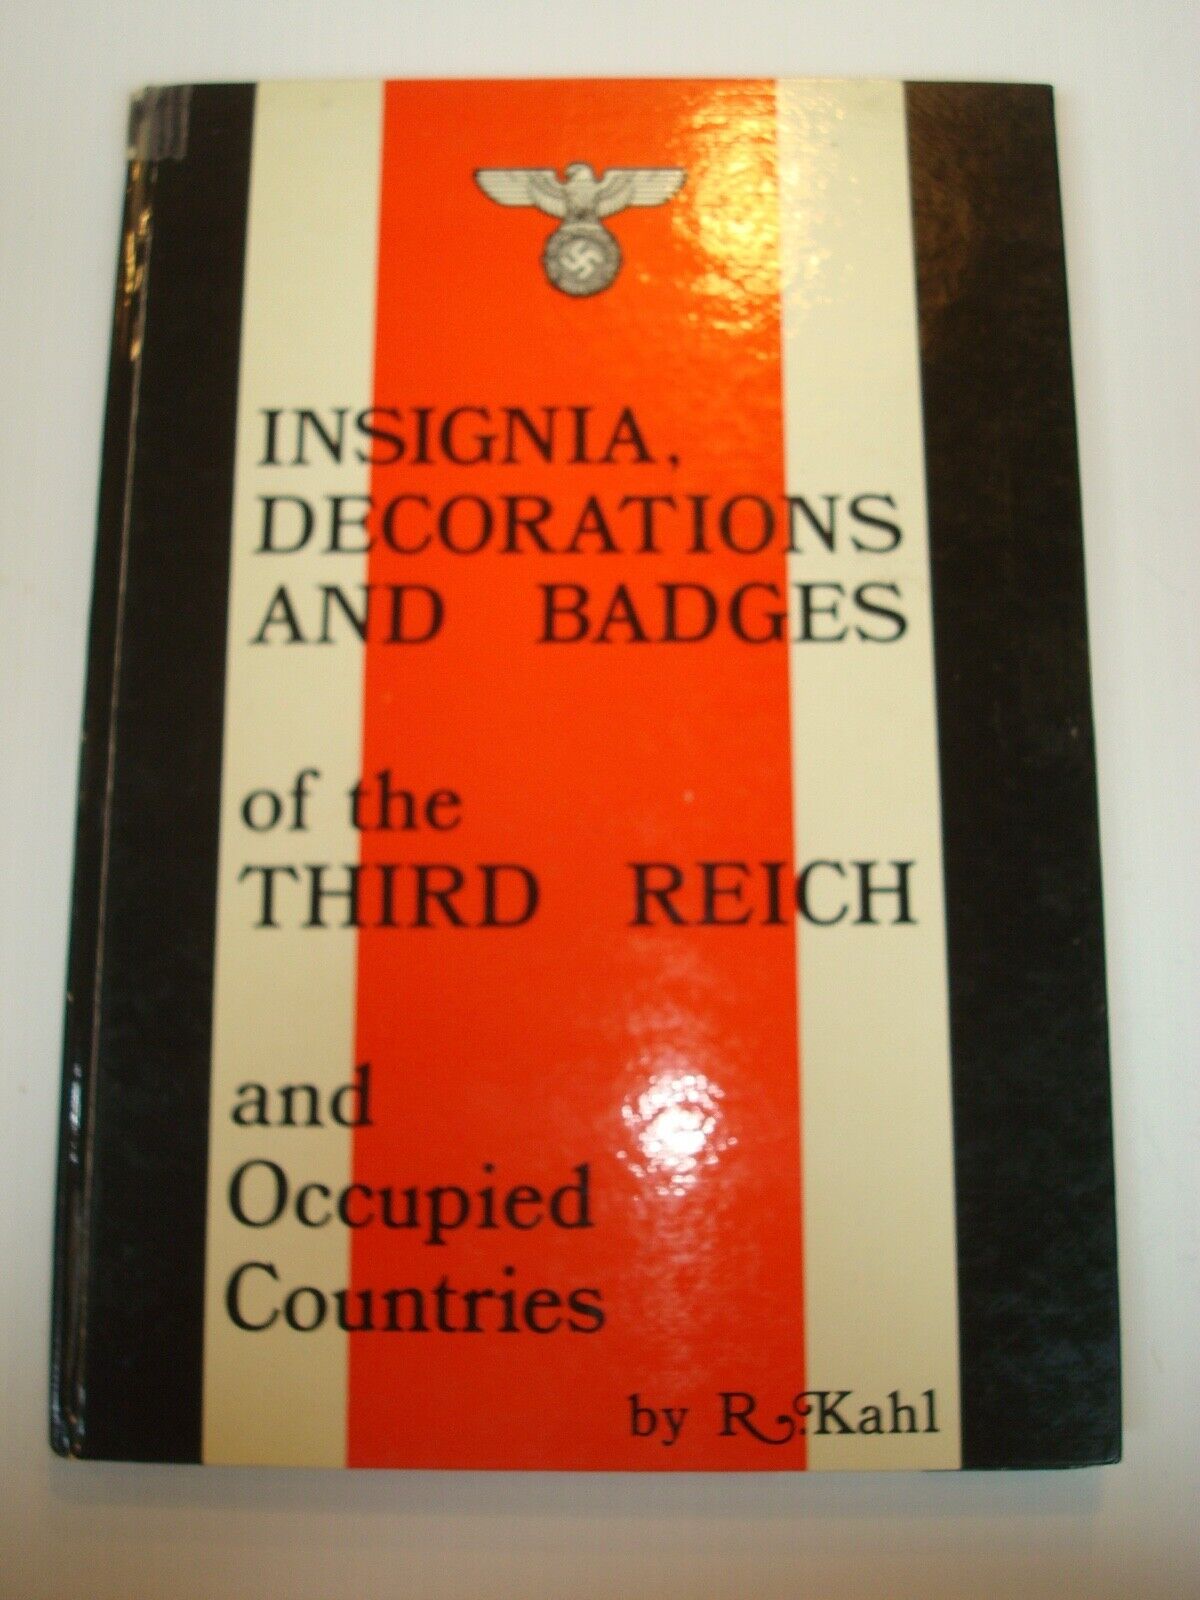 Insignia, Decorations & Badges of the Third Reich, R. Kahl, Illustrated Book 